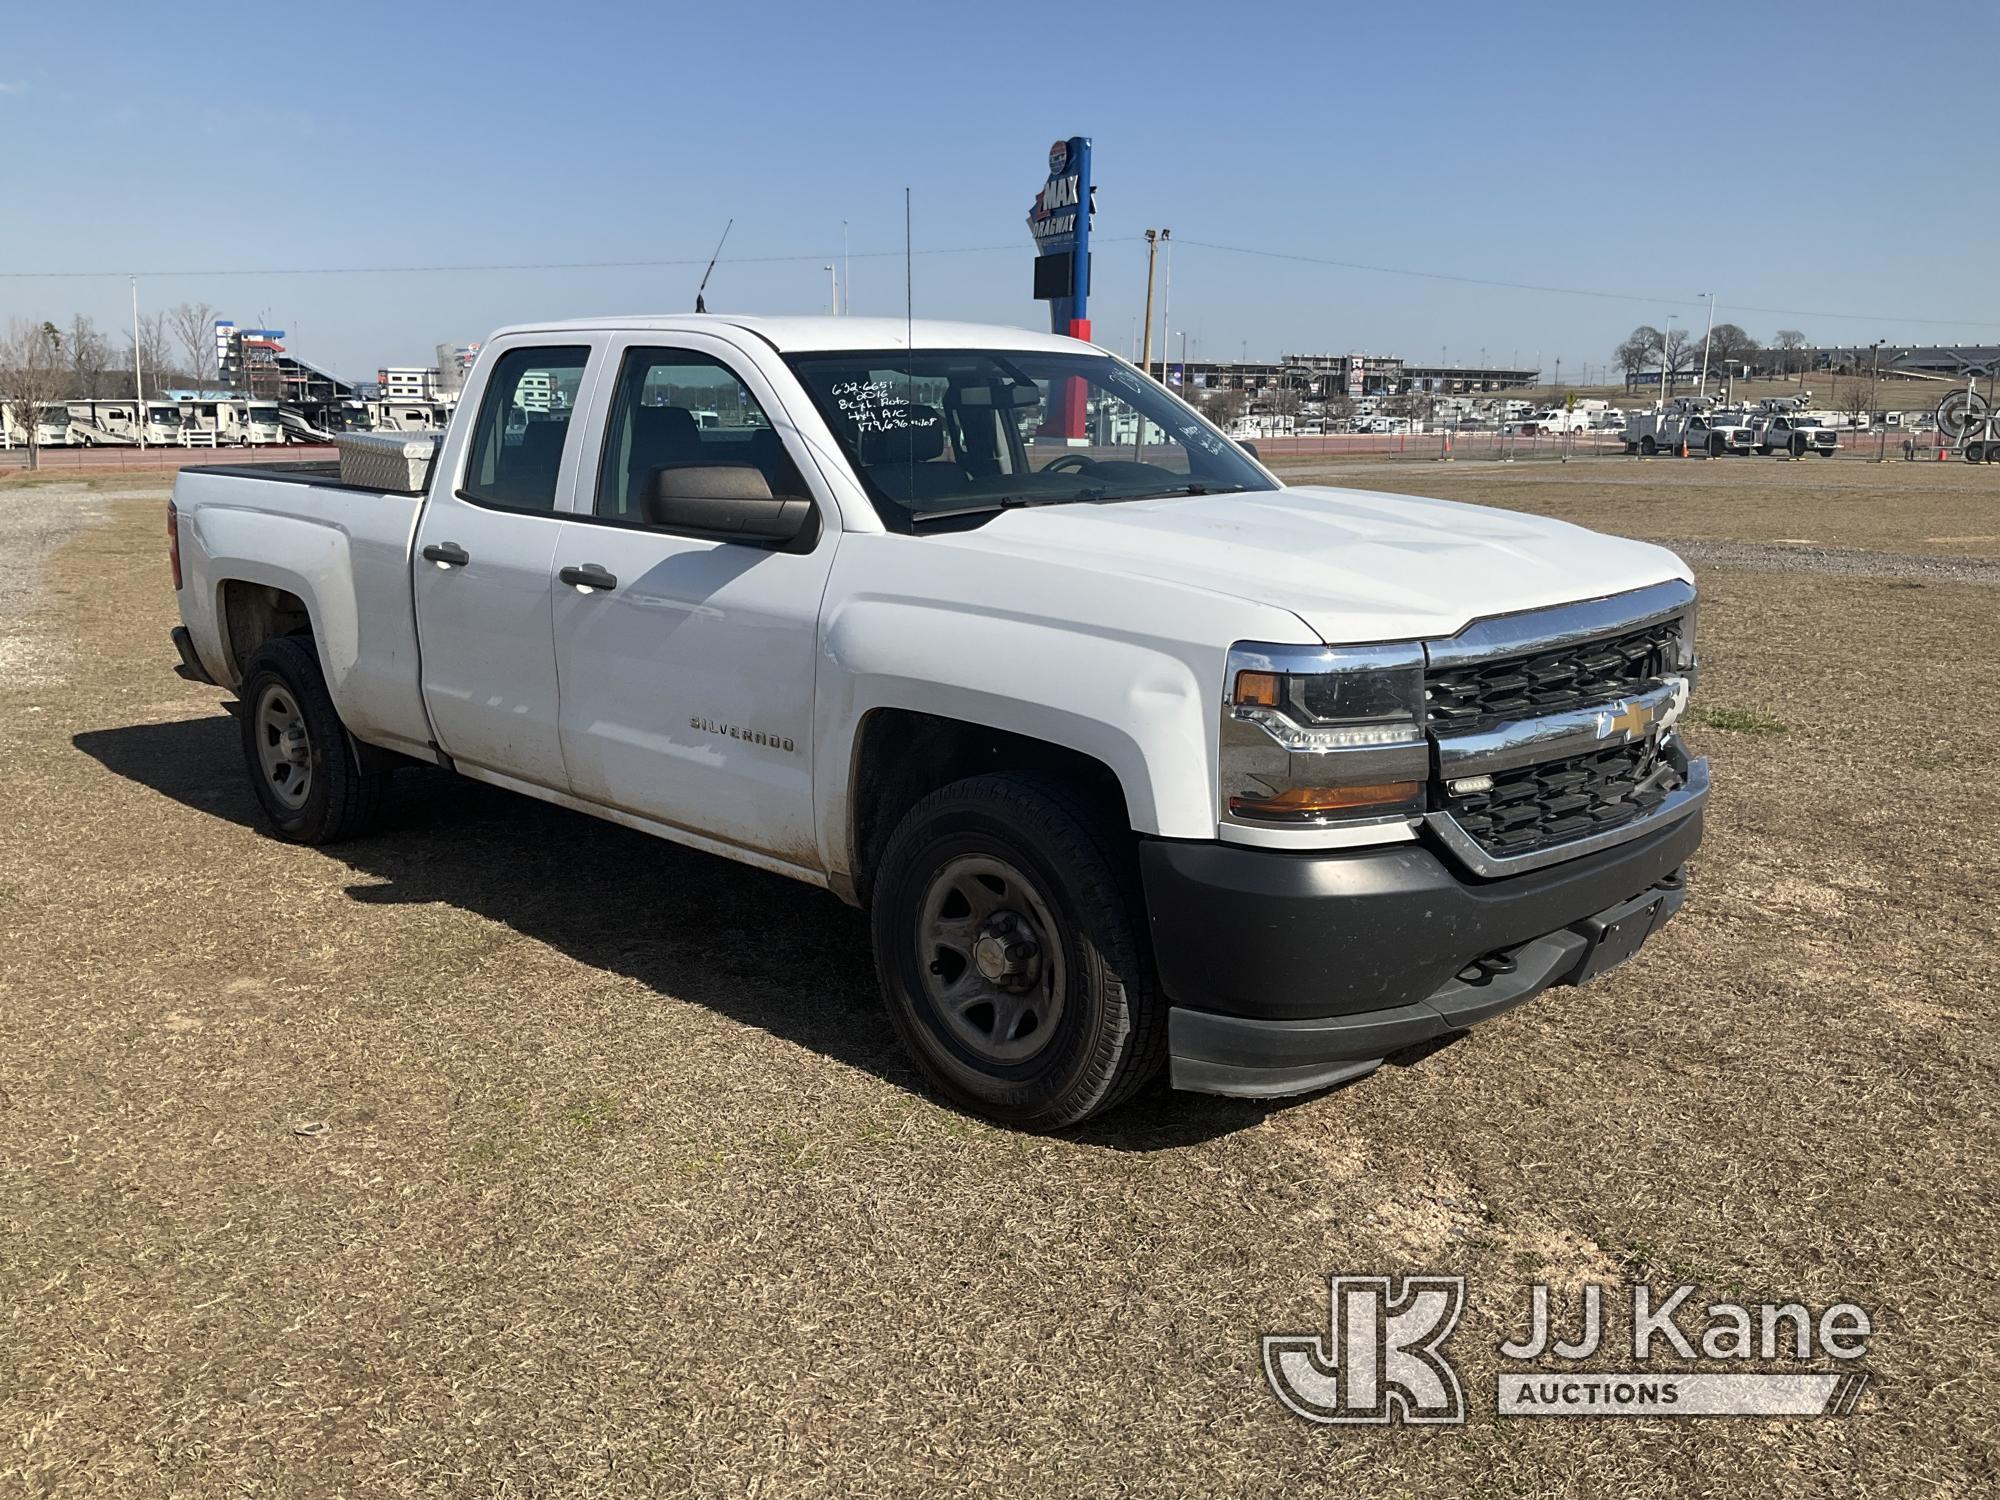 (Charlotte, NC) 2016 Chevrolet Silverado 1500 4x4 Extended-Cab Pickup Truck Runs & Moves) (Wrecked